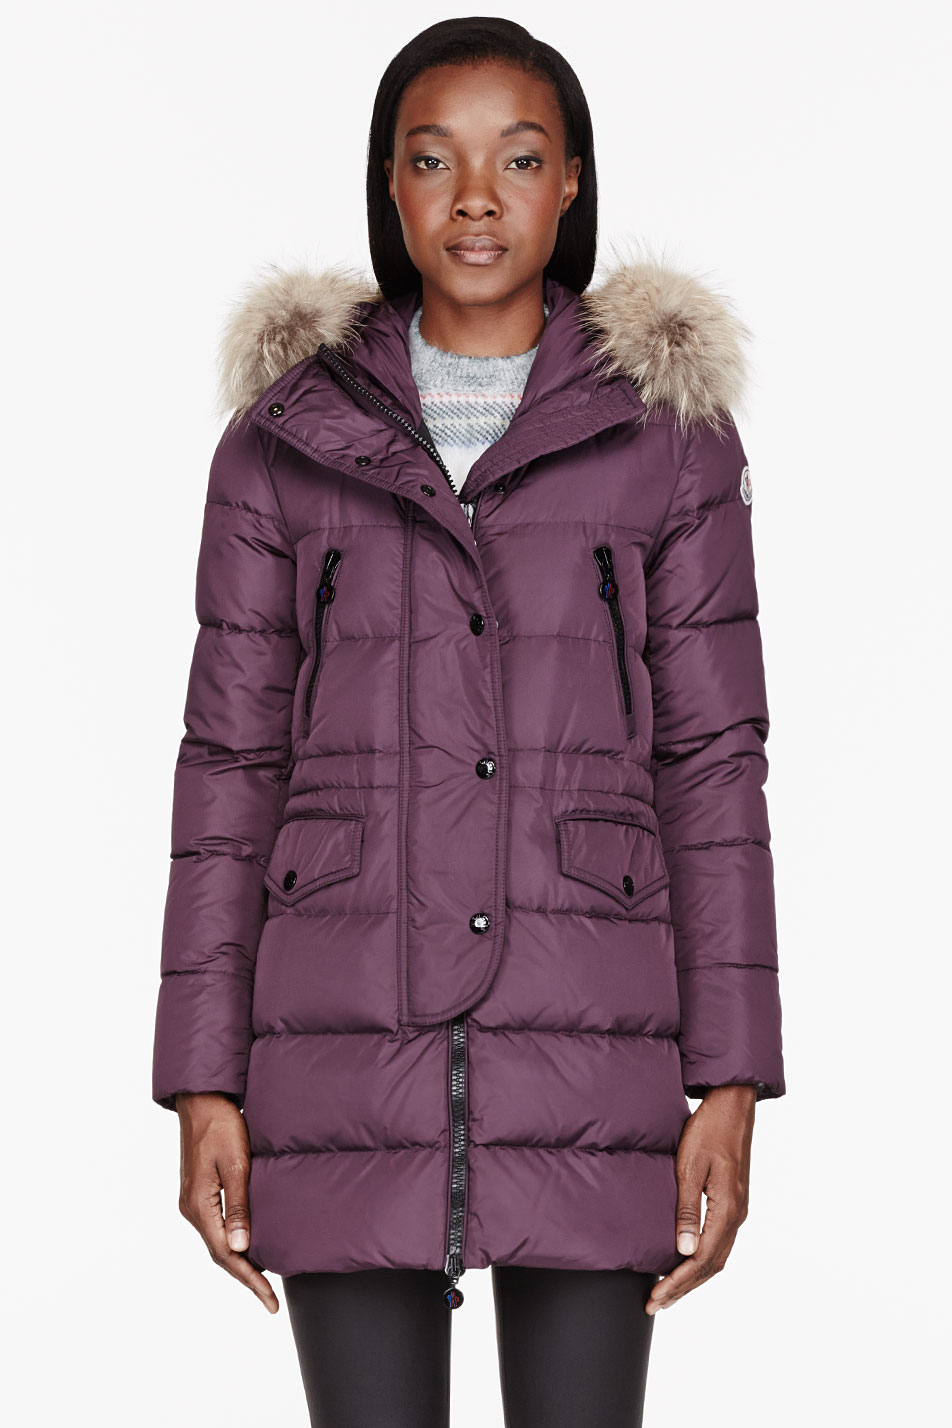 Lyst - Moncler Plum Purple Down and Fur Fragon Parka in Purple